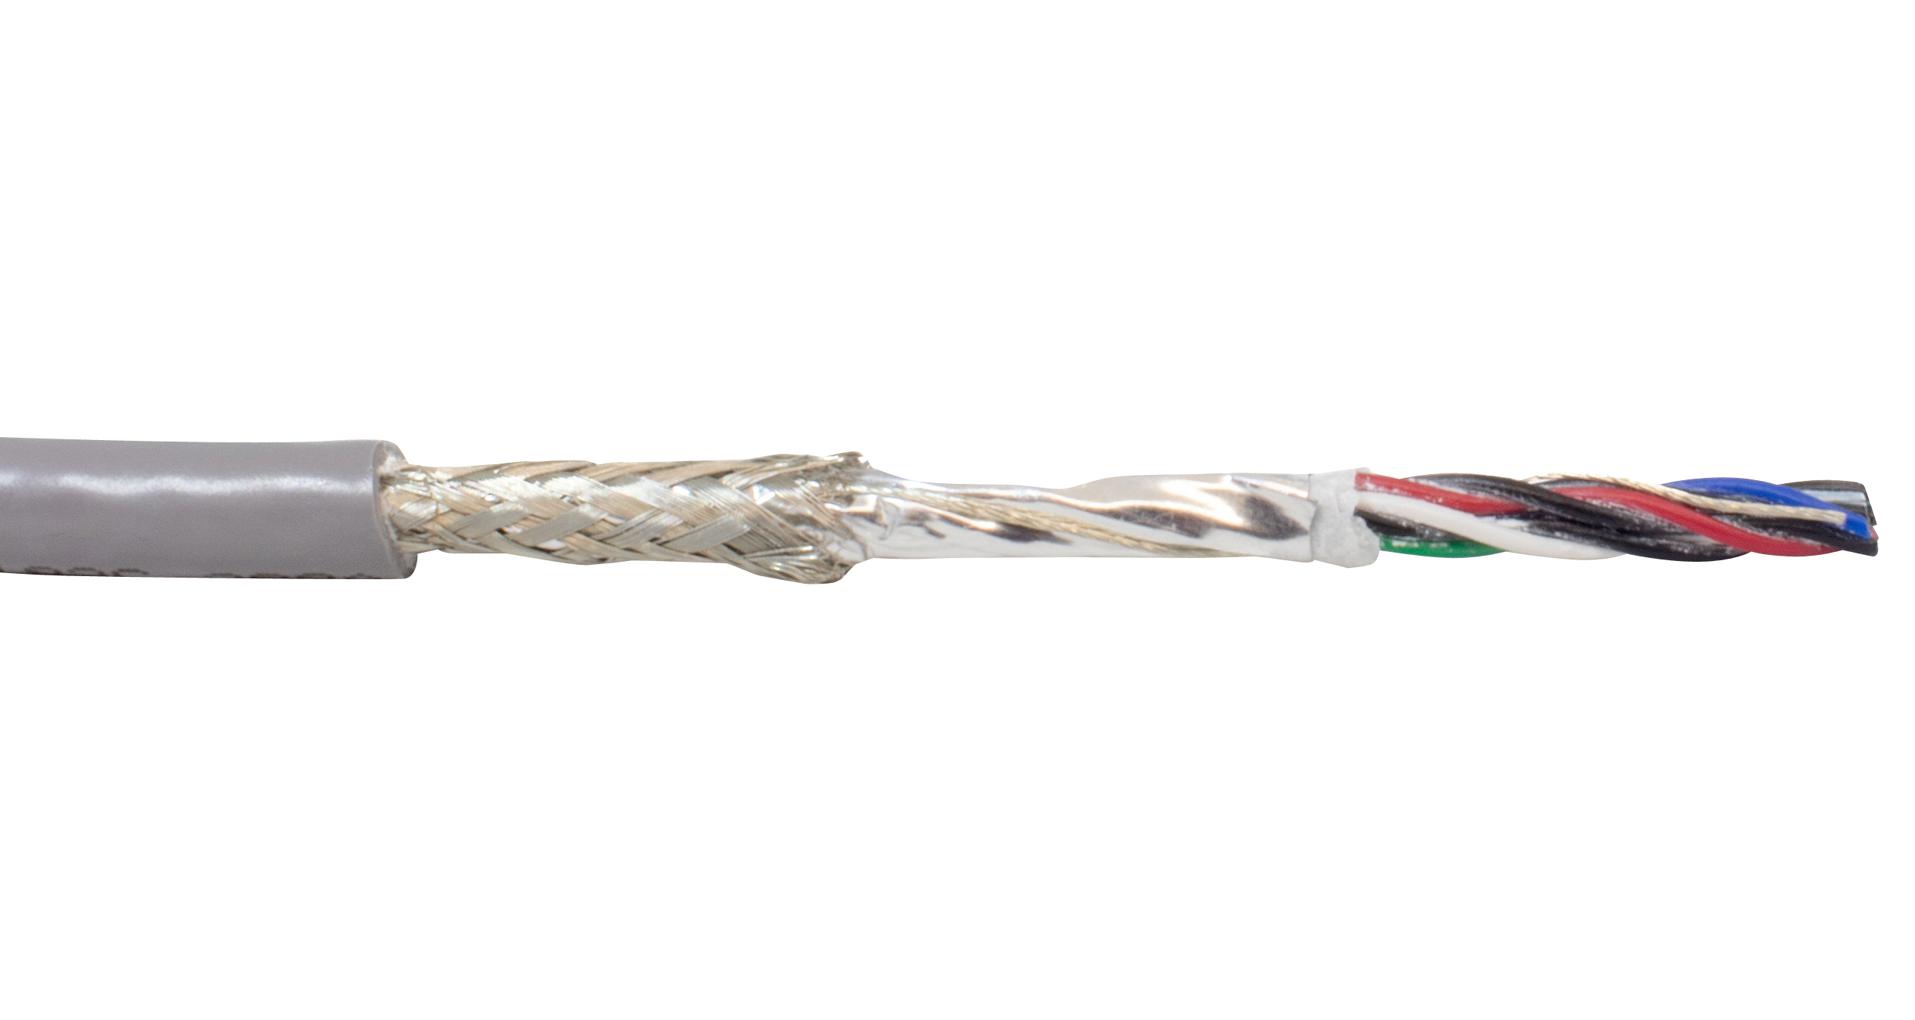 86403CY SL001 SHLD MULTIPAIR, 3 PAIR, 28AWG, 305M ALPHA WIRE